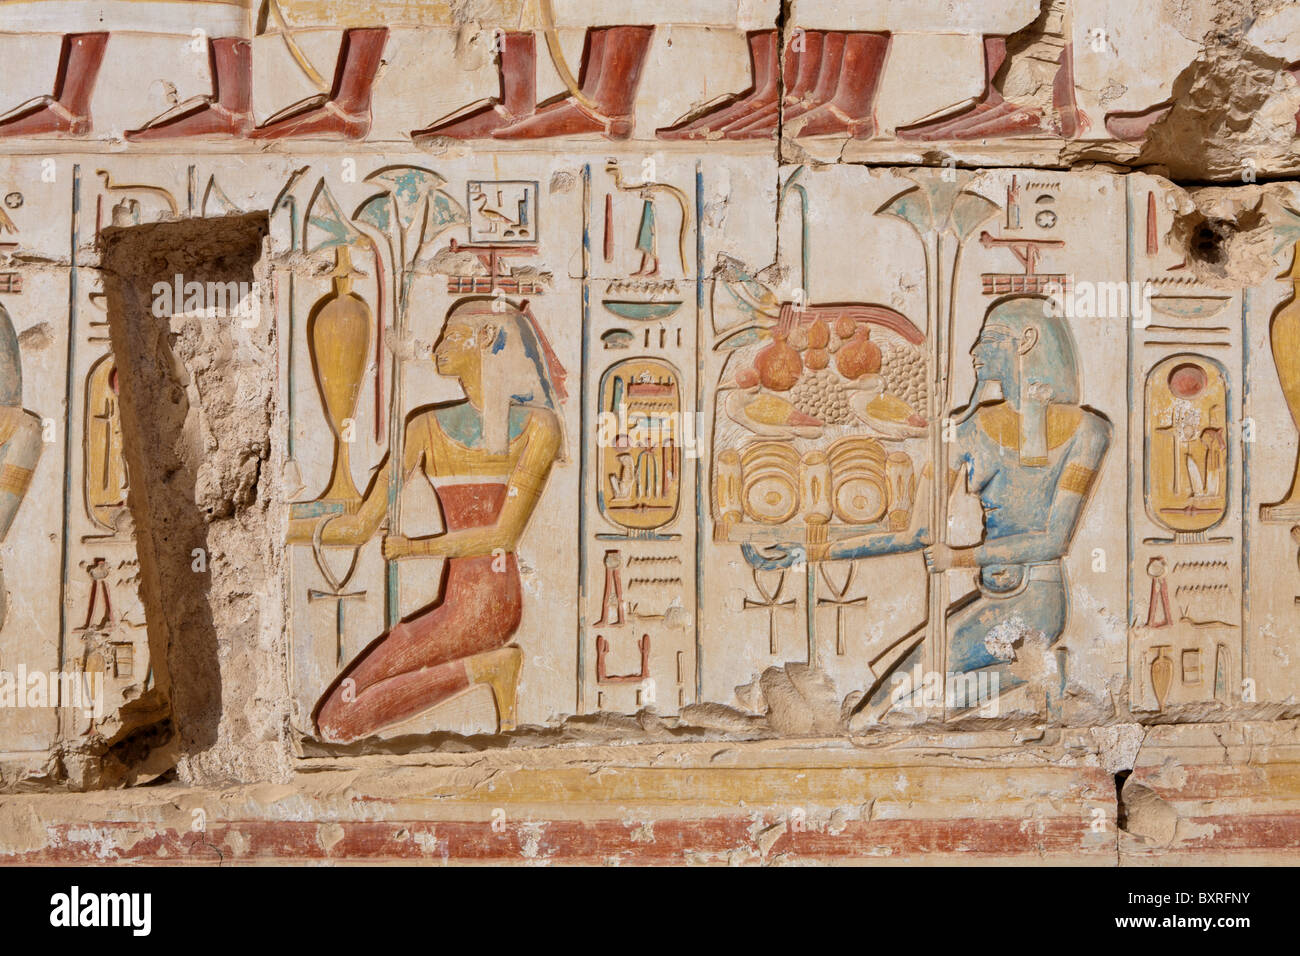 The Temple of Ramesses II close to the Temple of Seti I at Abydos, Egypt Stock Photo